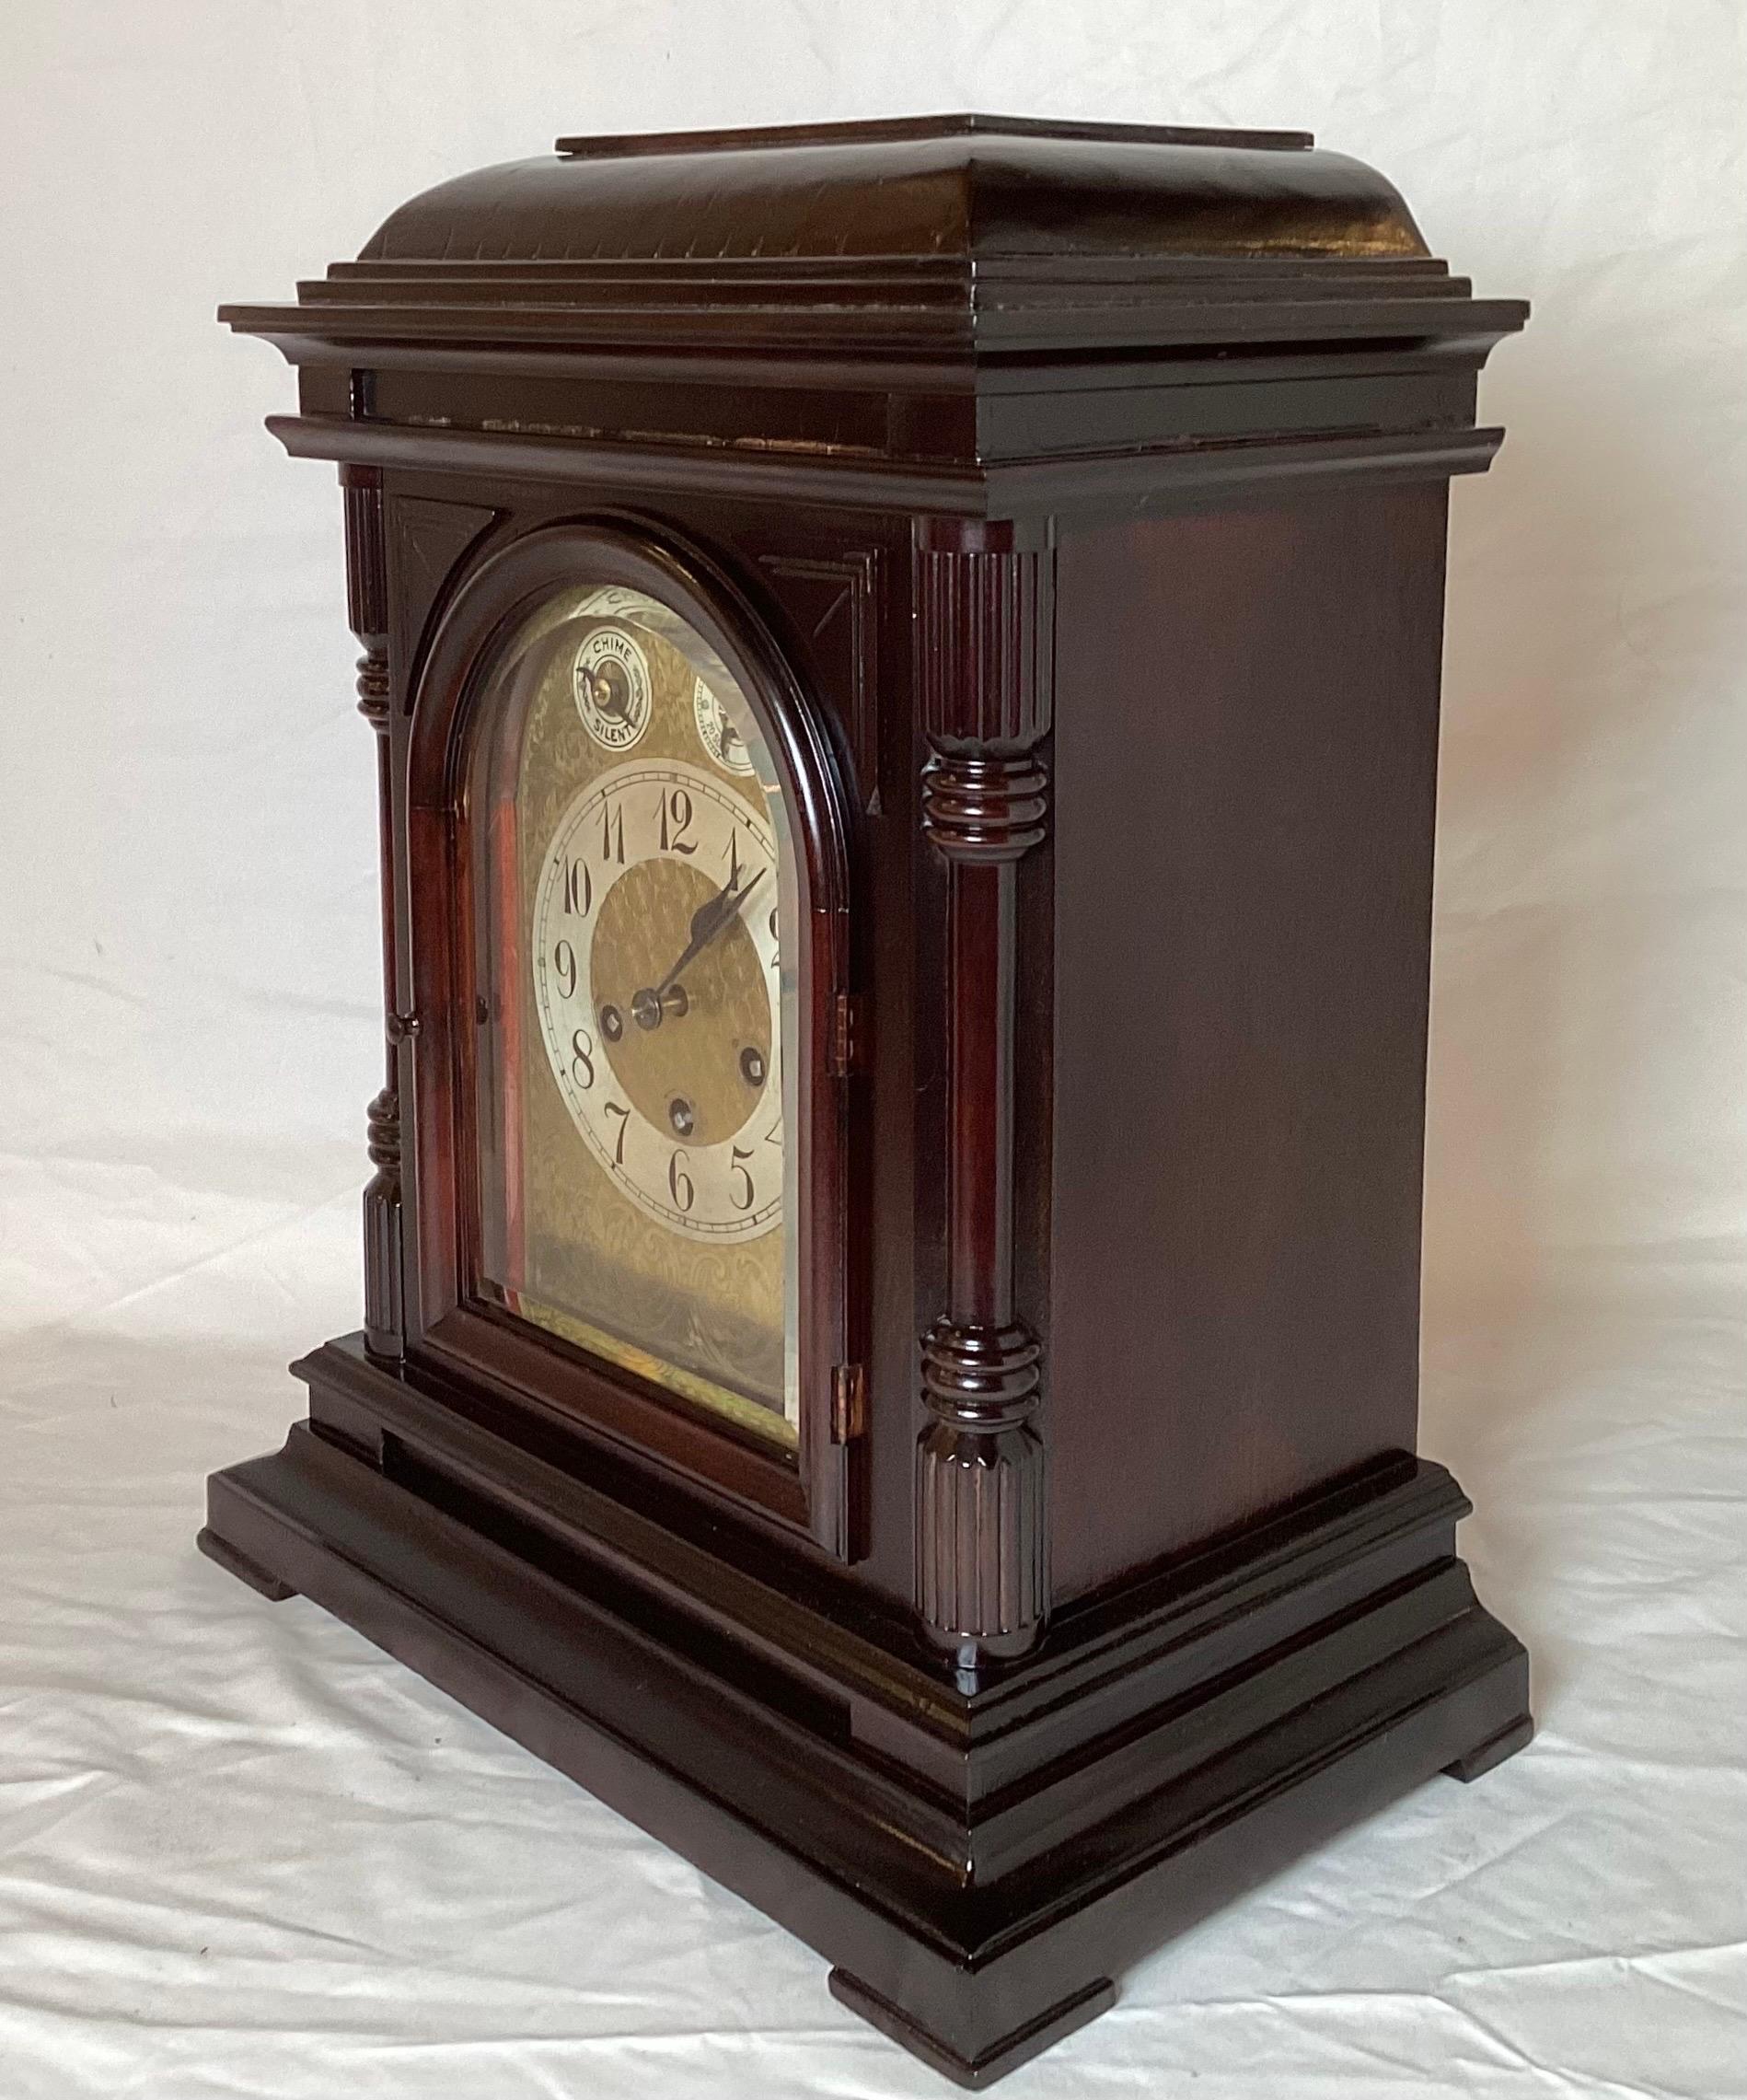 Elegant mahogany cased bracket clock with beveled glass front. The clock, with German movement with Westminster chime on each quarter hour and strike at the hour. The case has been refinished and looks beautiful on the mantle or case piece.. Circa